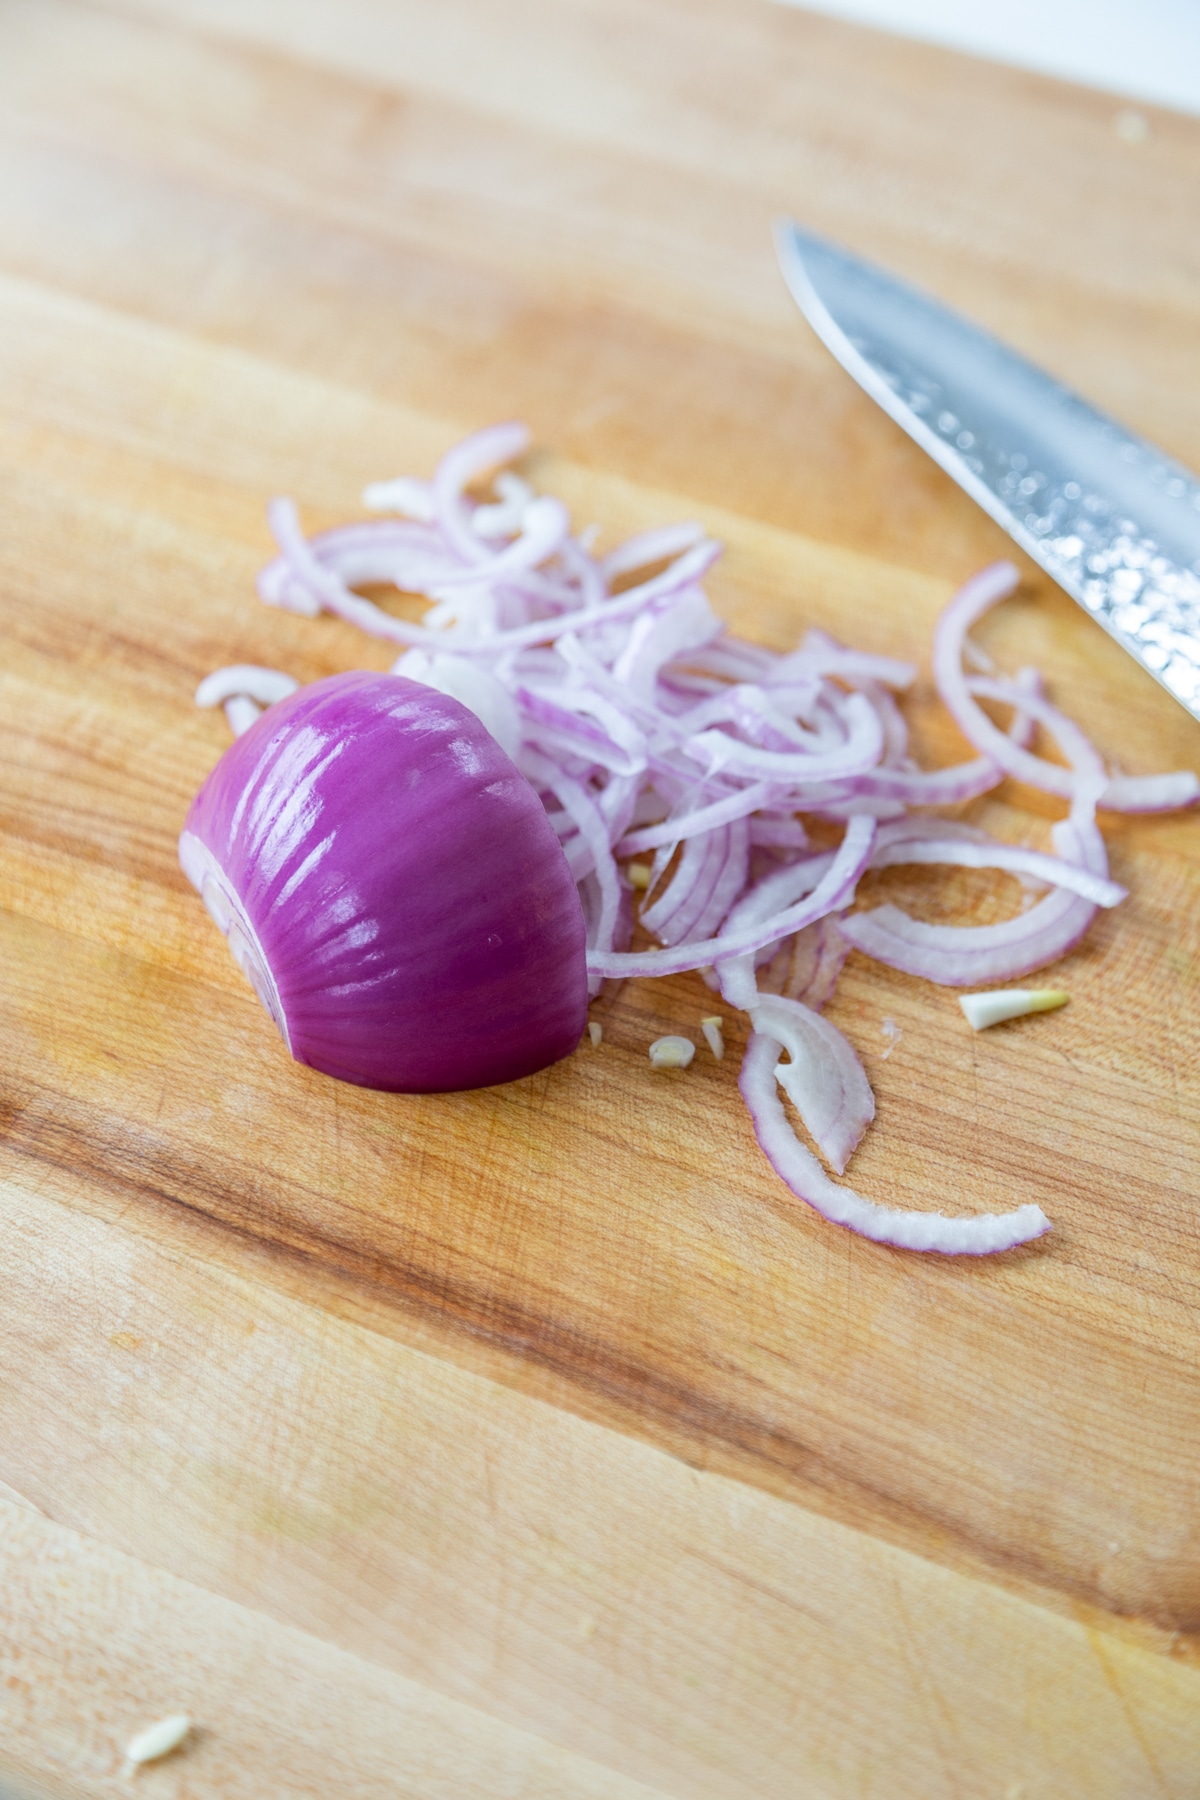 Thinly sliced red onion from half of an onion on a wooden cutting board with a knife on the board.